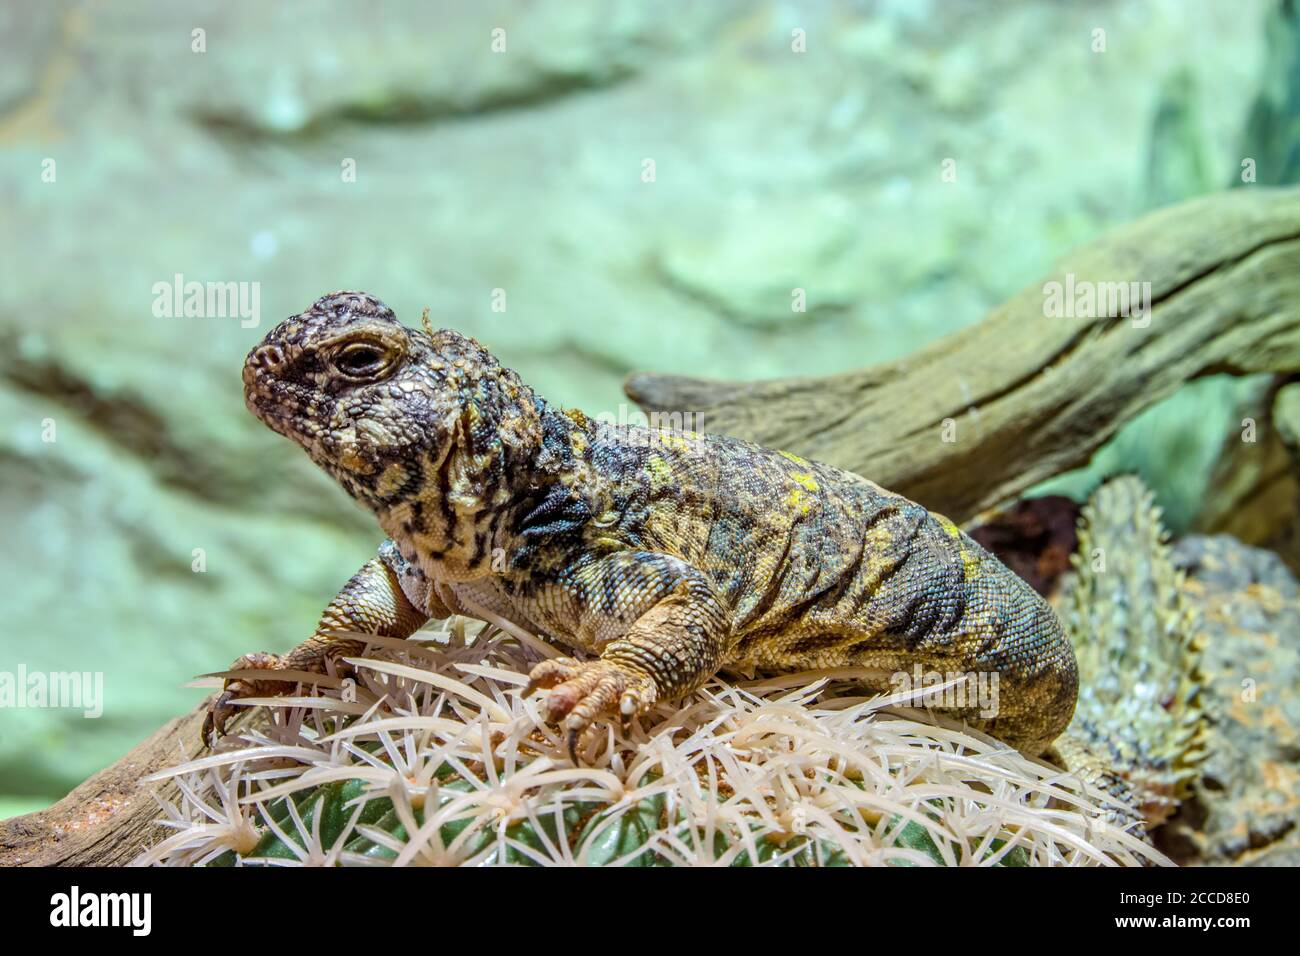 ornate mastigure (Uromastyx ornata) is a species of lizard in the family Agamidae. Stock Photo